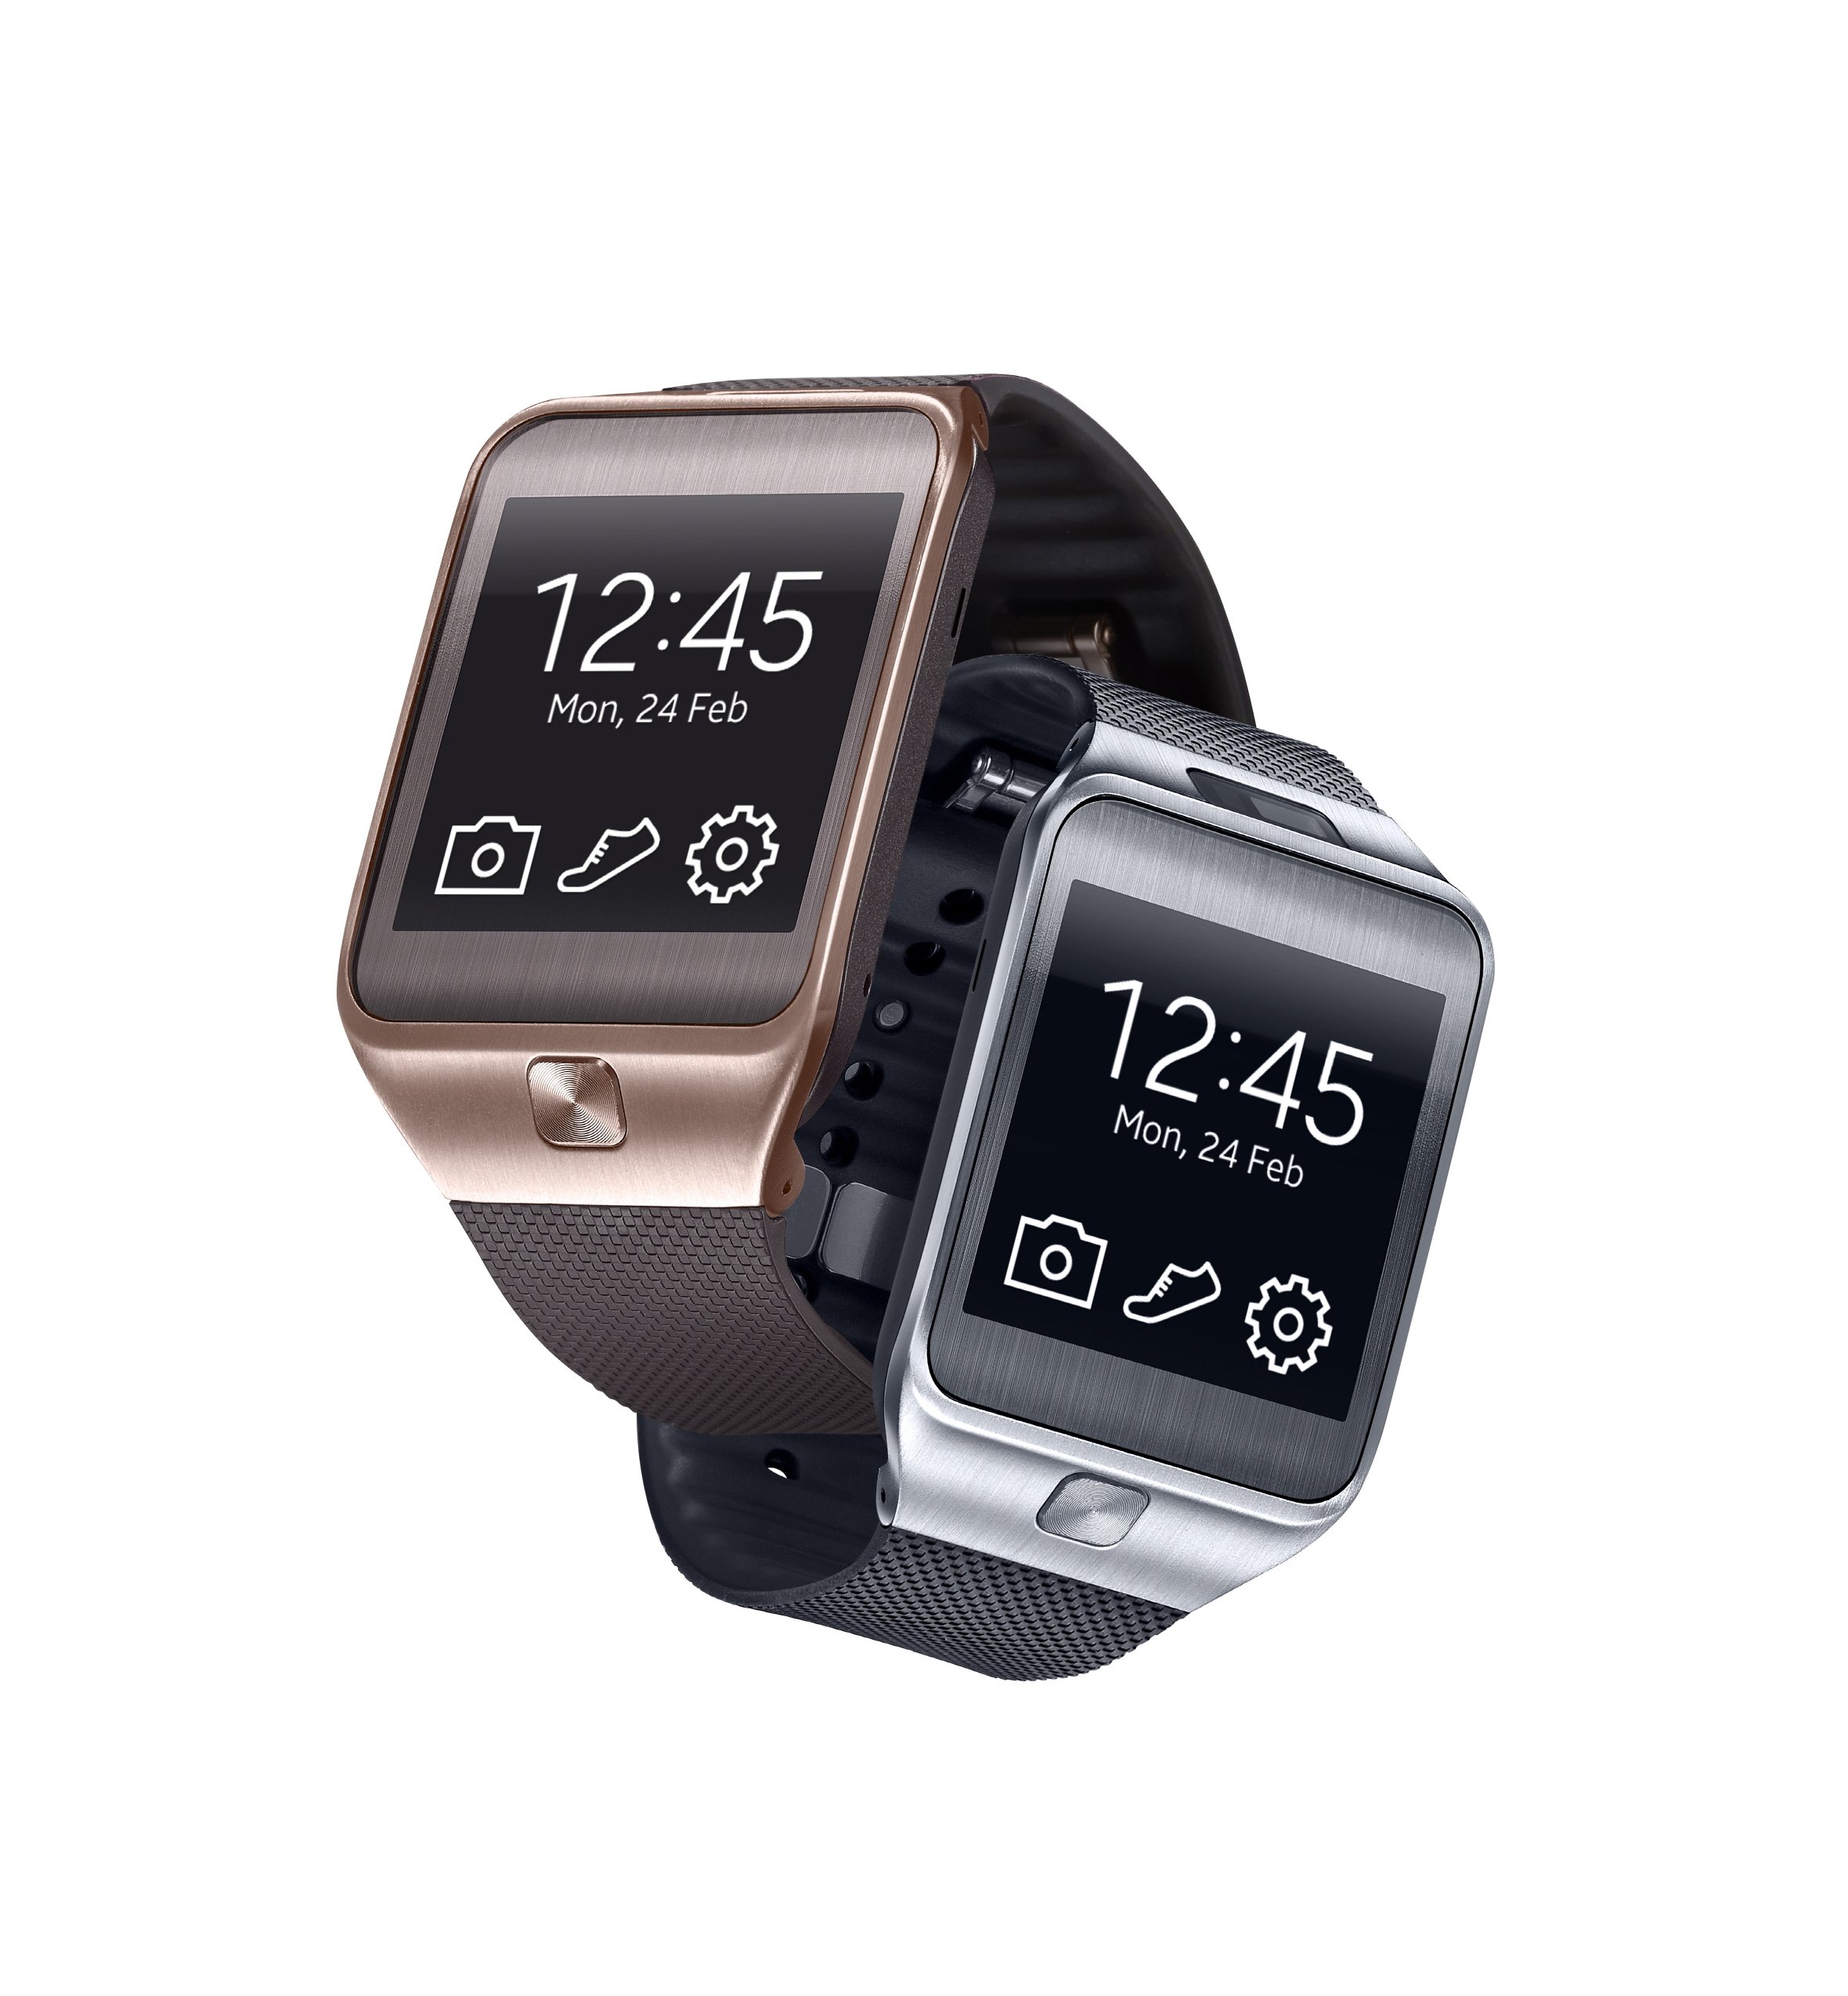 duisternis Effectief extase Samsung Unveils Gear 2 Smartwatches Ahead of Galaxy S5 Announcement